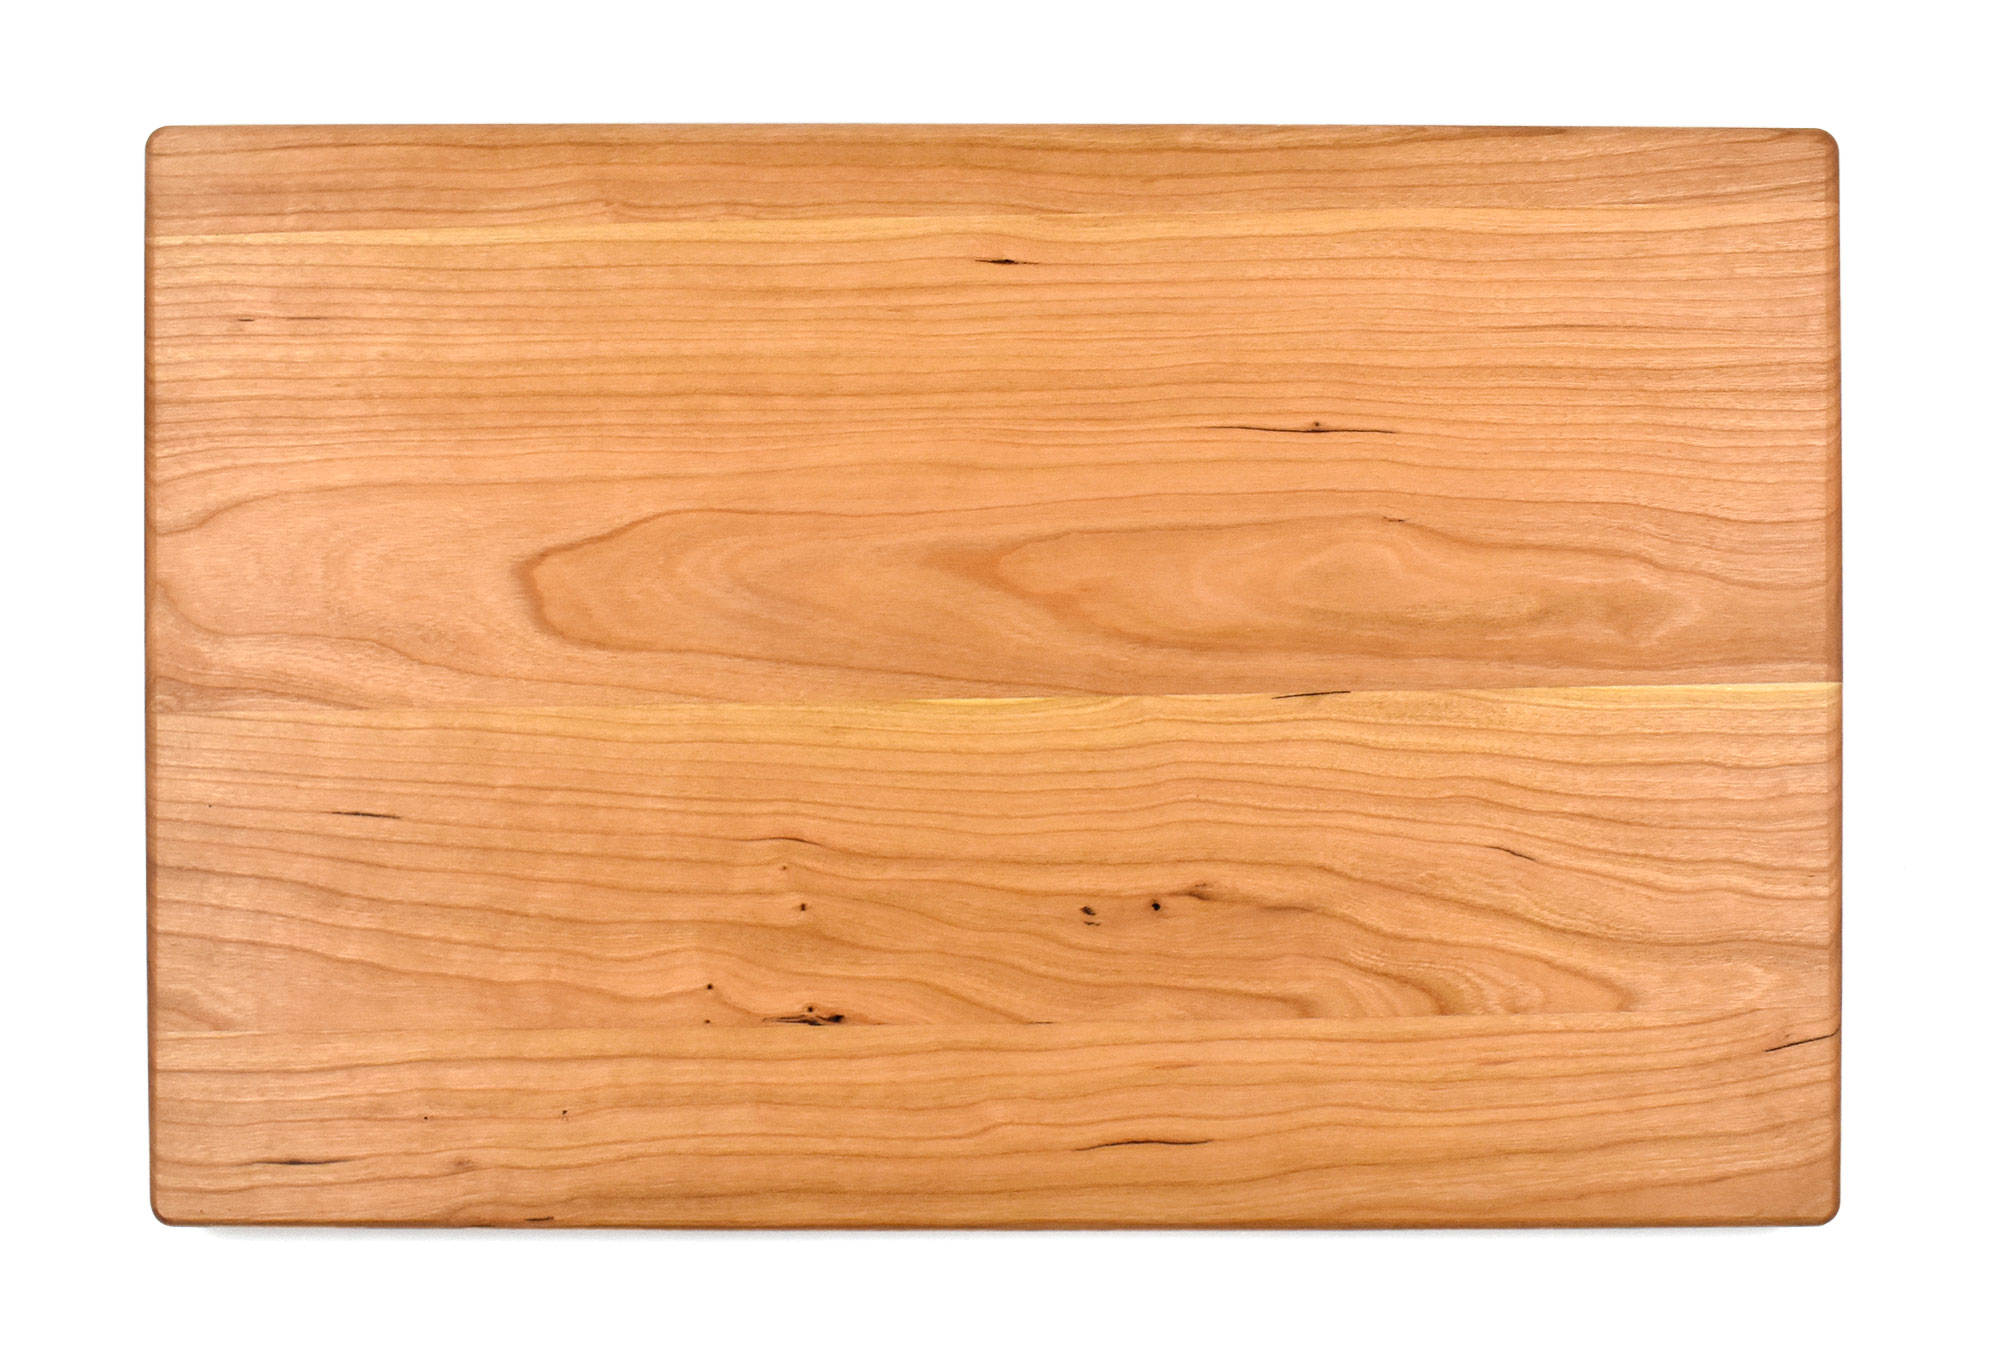 Butcher Block 1 Inch Thick